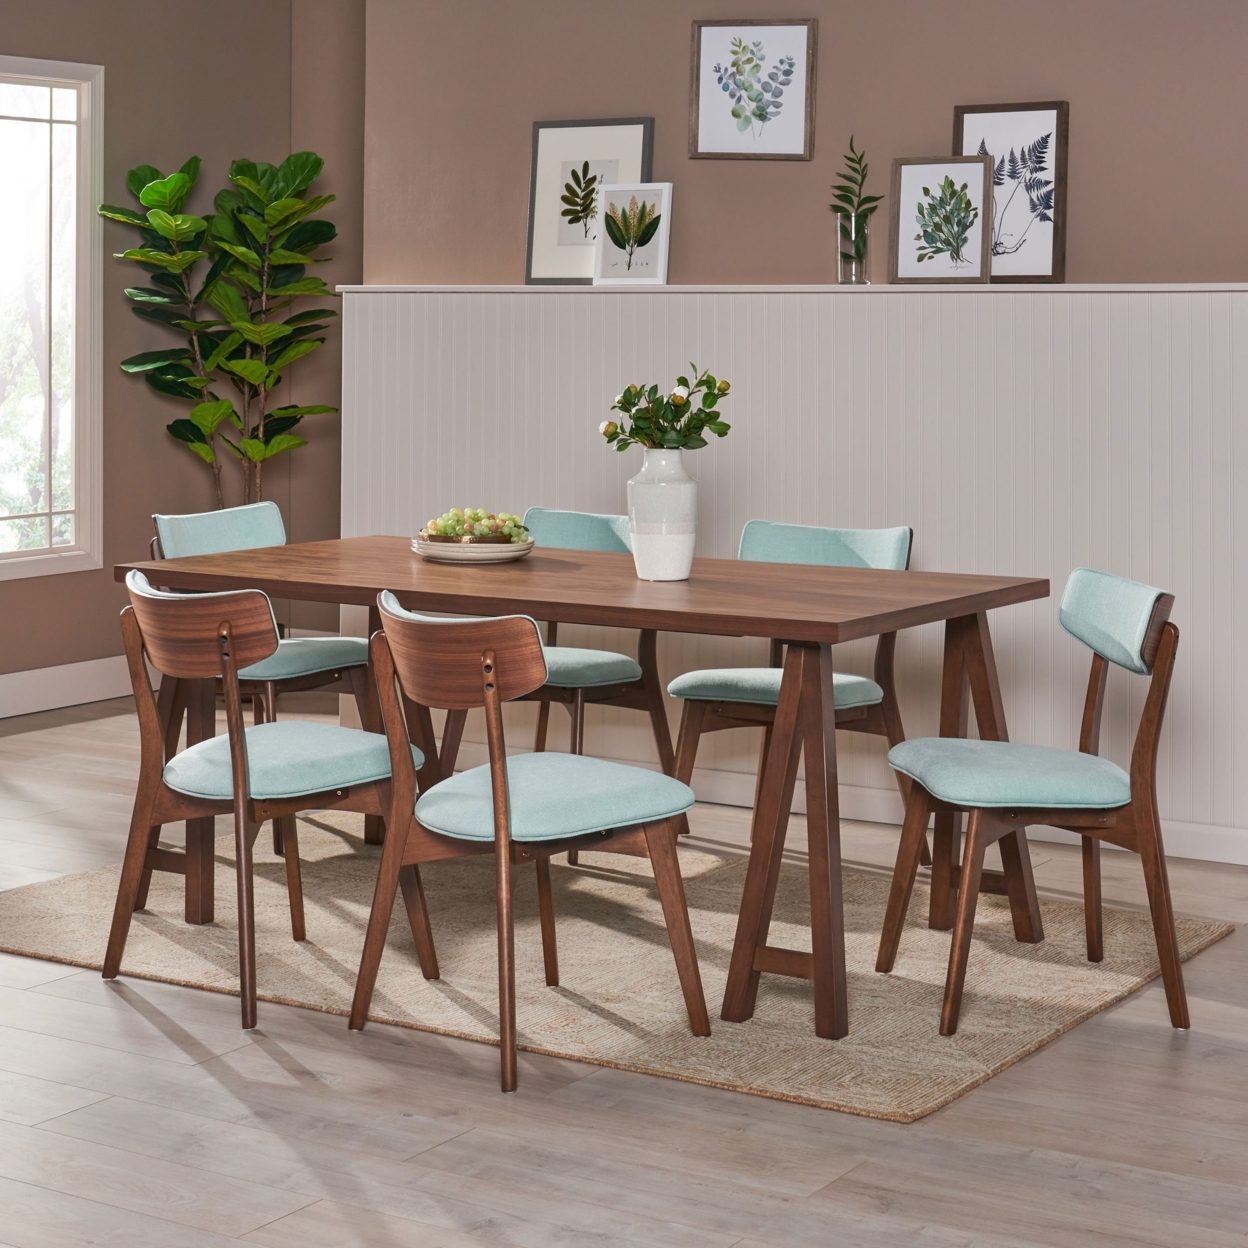 Turat Mid-Century Modern 7 Piece Dining Set With A-Frame Table - Natural Walnut/mint